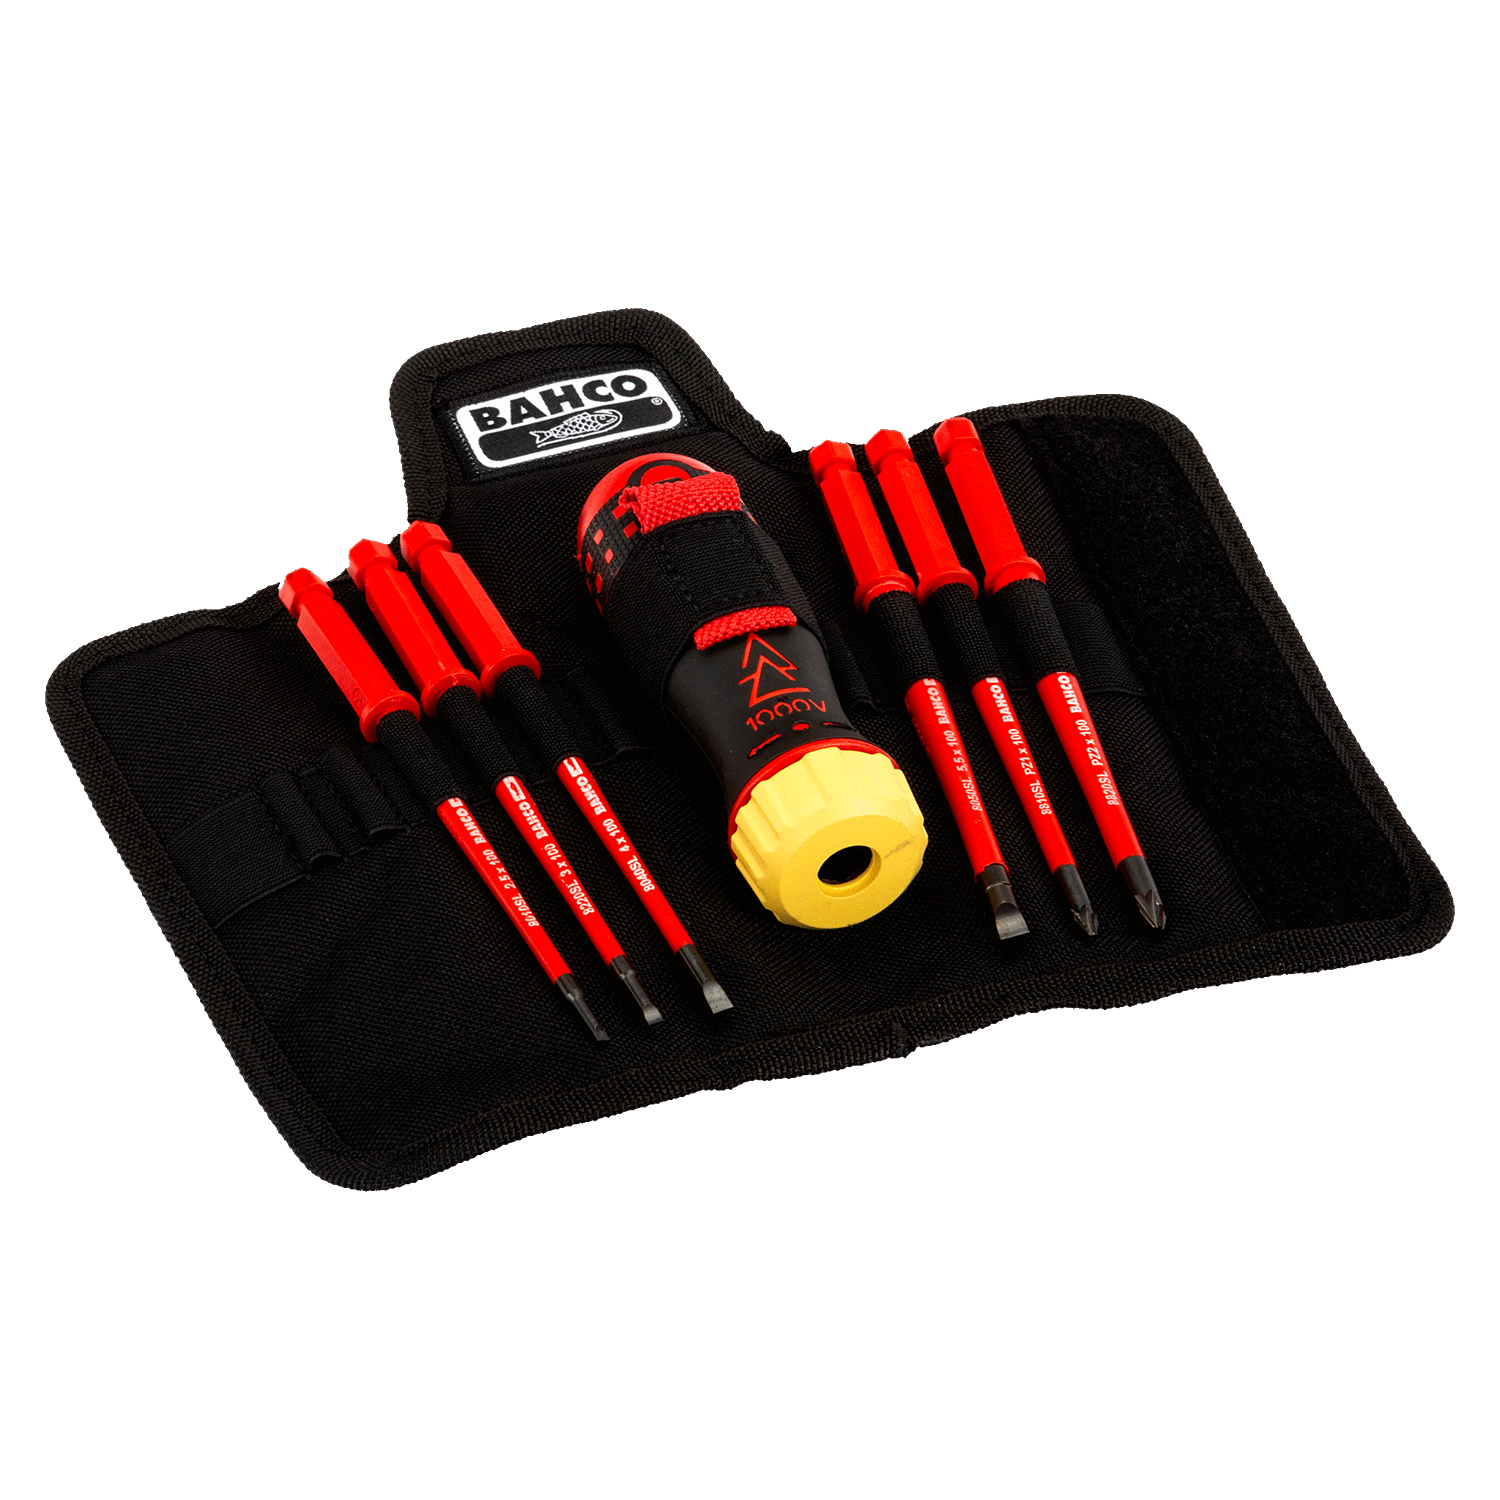 BAHCO 808062 Insulated Ratcheting Screwdriver and Blade Set-6 Pcs - Premium Screwdriver and Blade Set from BAHCO - Shop now at Yew Aik.